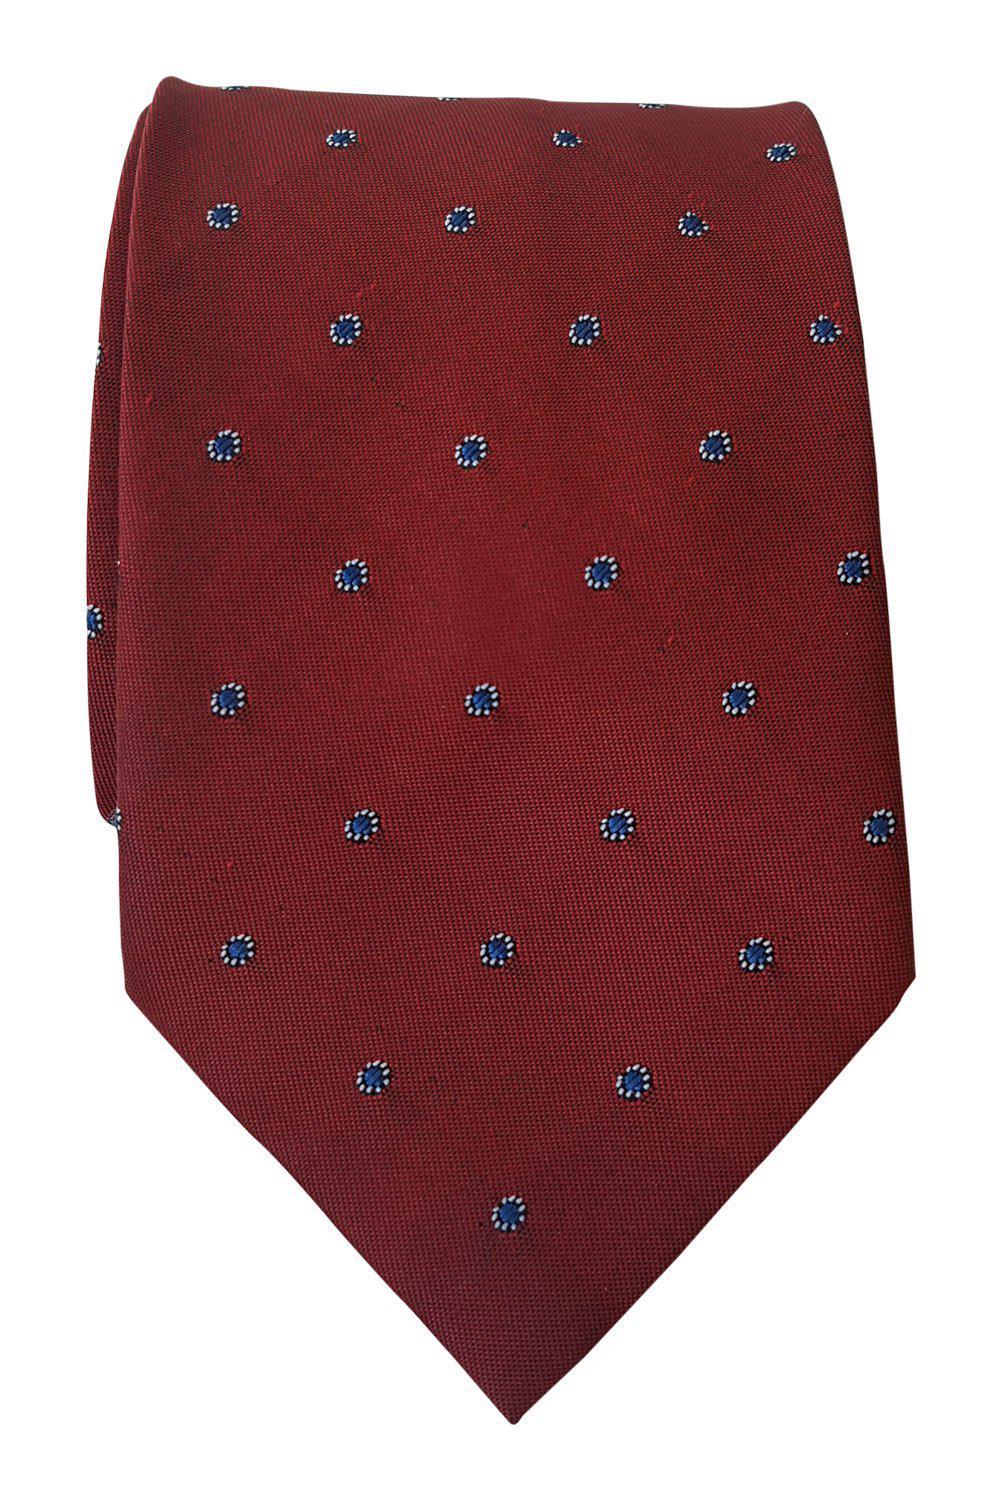 THE BURTON COLLECTION Metallic Red Tie With Blue Dotted Repeat (57")-The Burton Collection-The Freperie